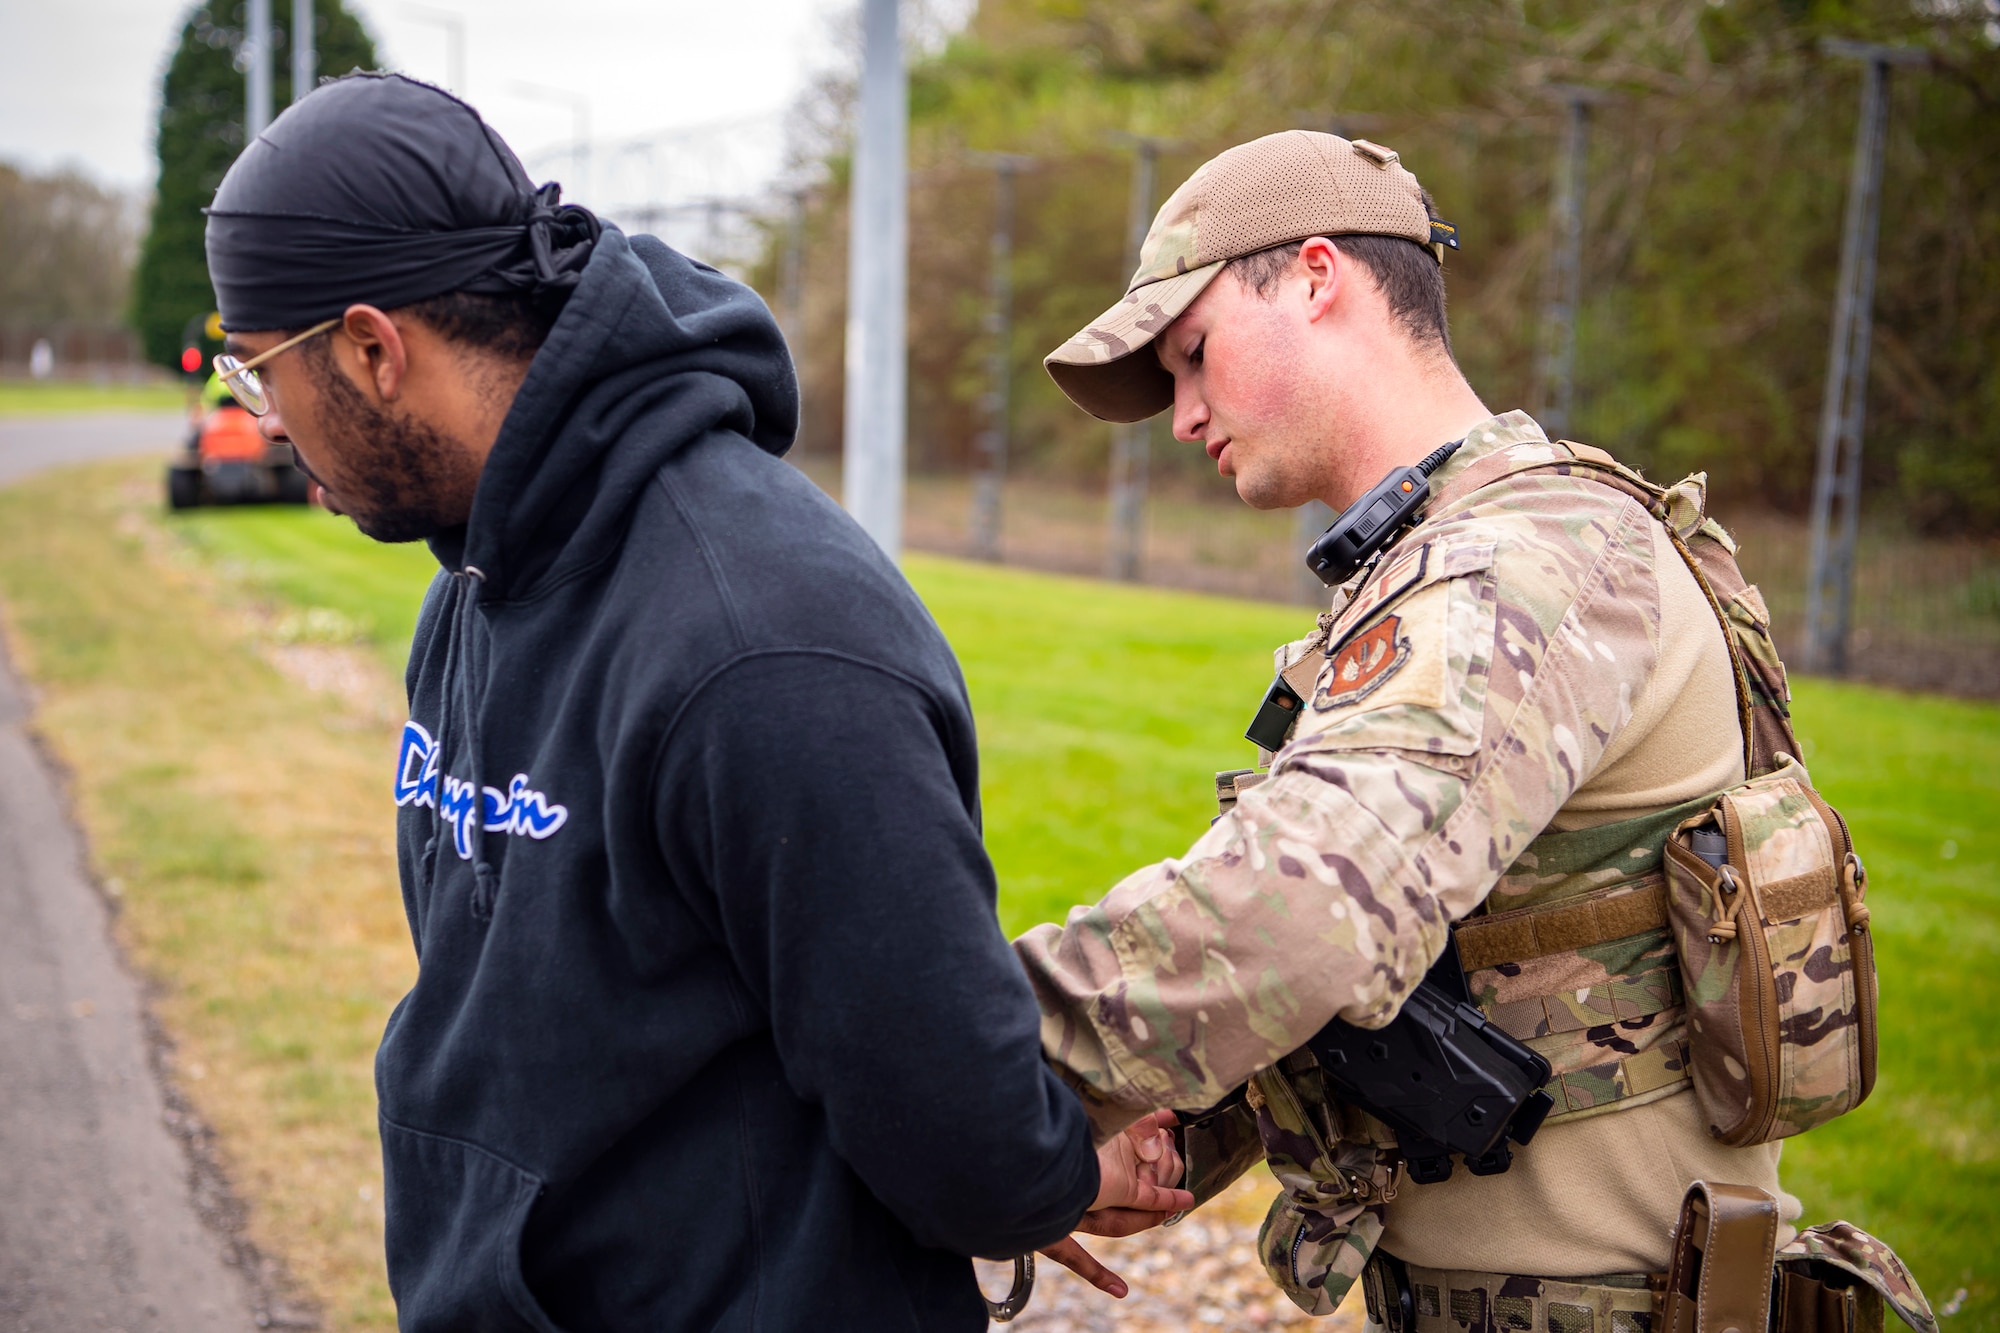 U.S. Air Force Senior Airman Zachary Hairston, 423rd Security Forces Squadron patrolman, apprehends a simulated suspect as part of a field training exercise at RAF Alconbury, England, April 27, 2022. The exercise was designed to evaluate the strengths and weaknesses of 423d SFS members' response to various scenarios including domestic disturbances, drunk driving and other base security incidents. (U.S. Air Force photo by Staff Sgt. Eugene Oliver)